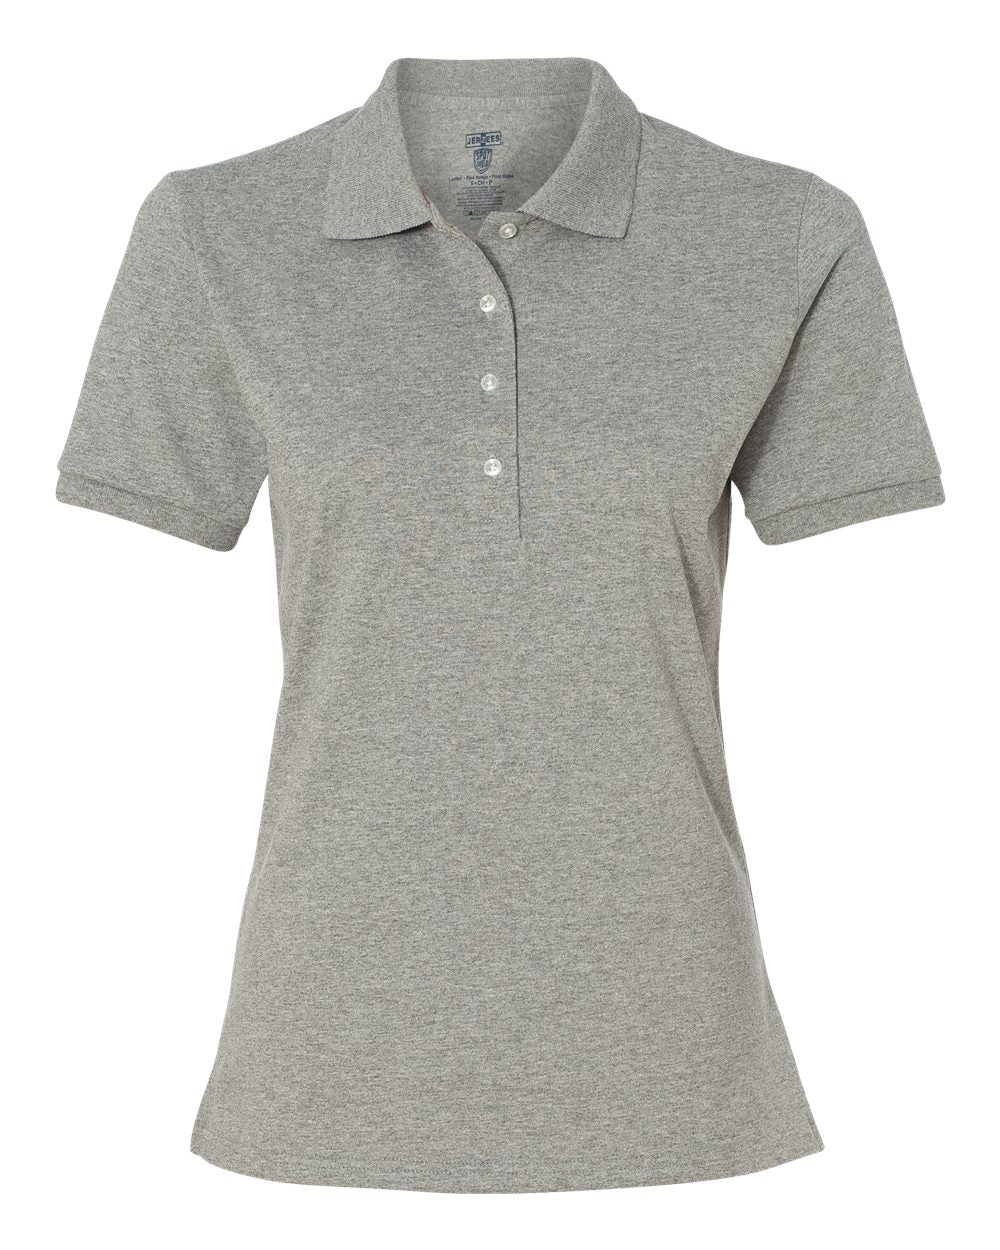 womans jerzees 50/50 polo oxford